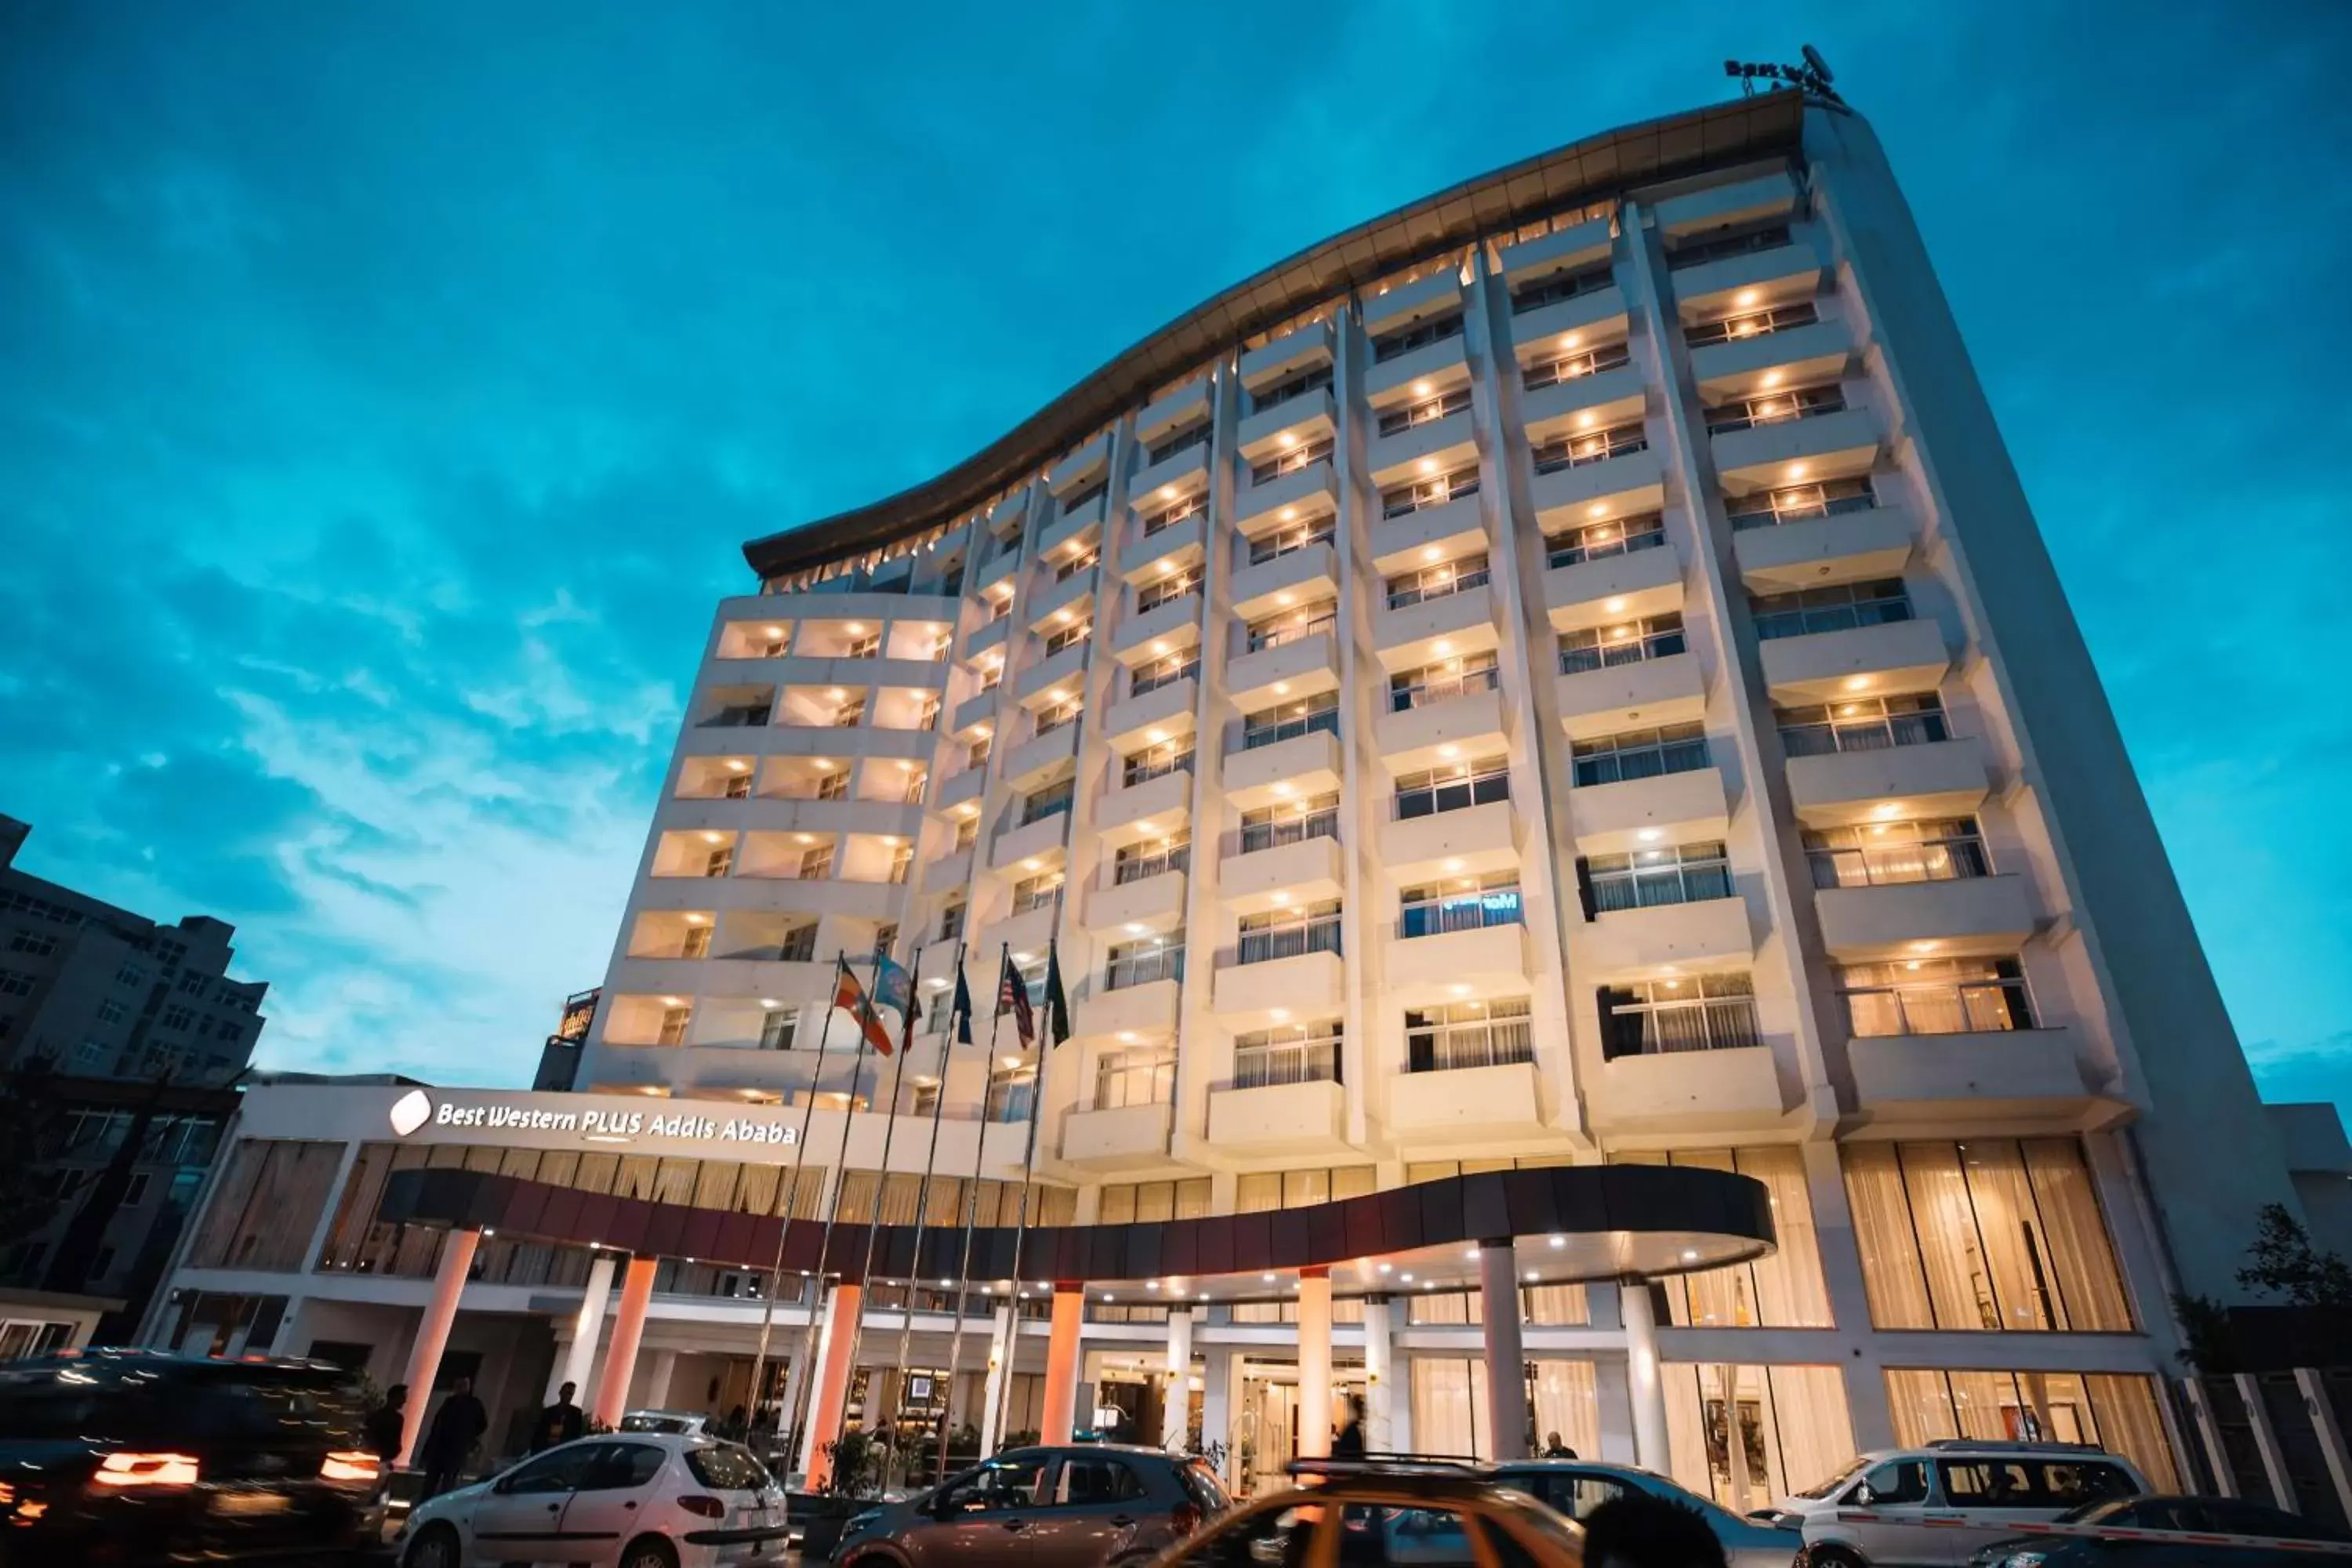 Property Building in Best Western Plus Addis Ababa